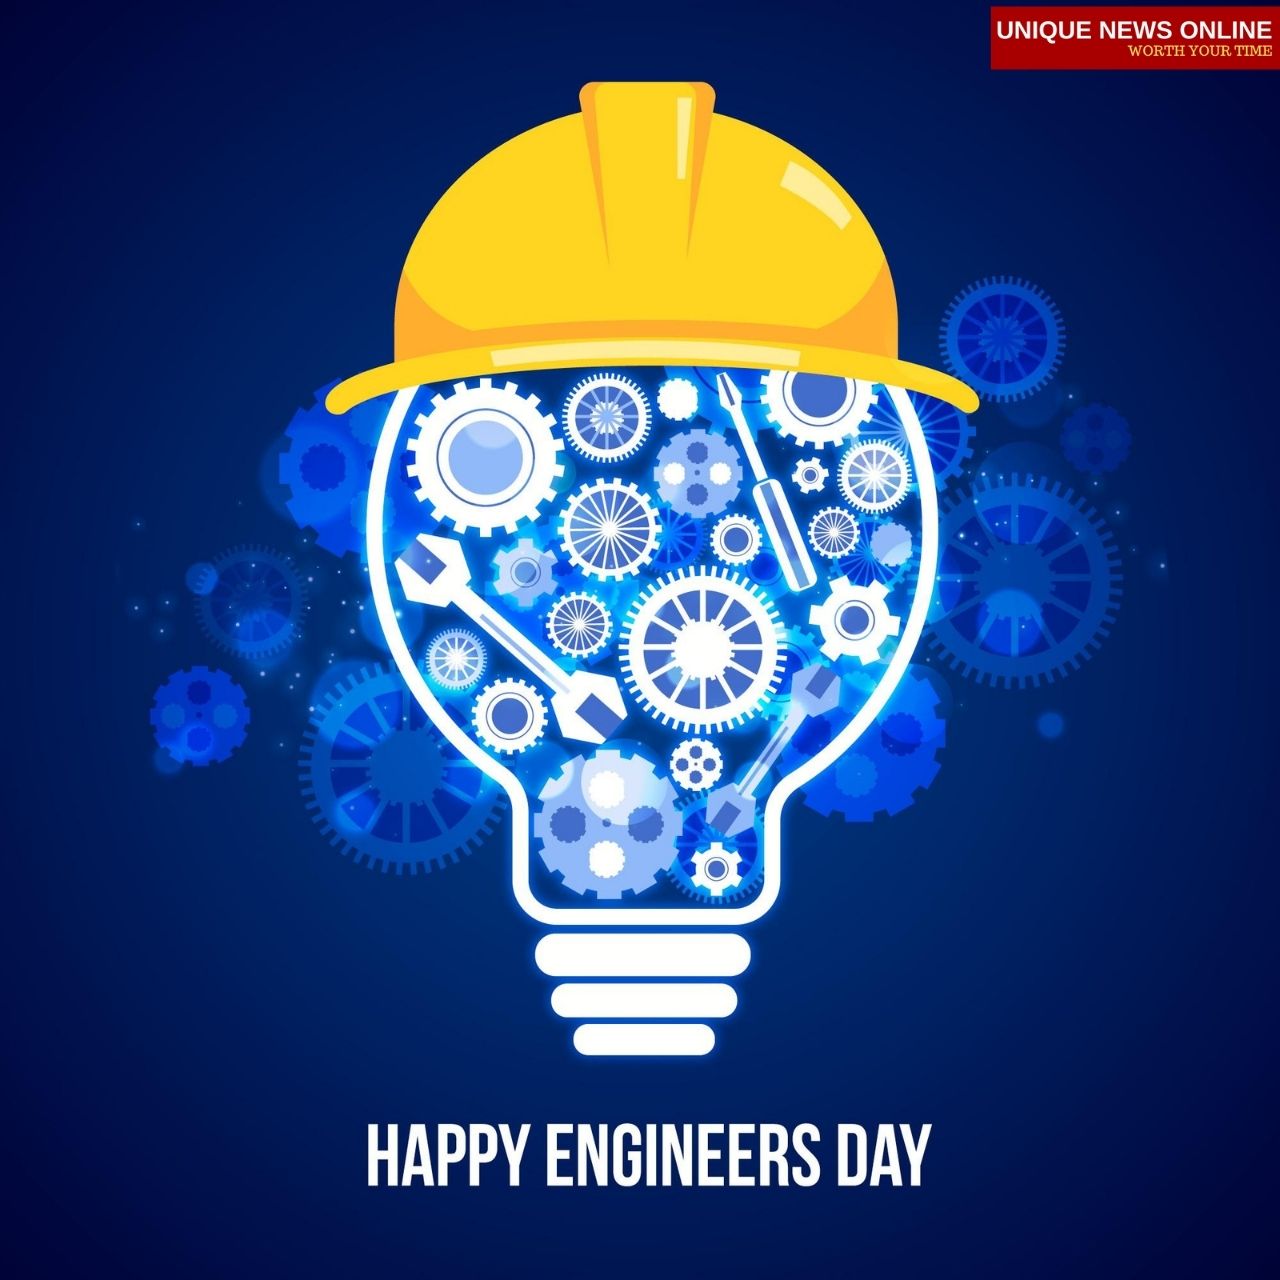 Engineer's Day 2021 WhatsApp Status Video to Download for free